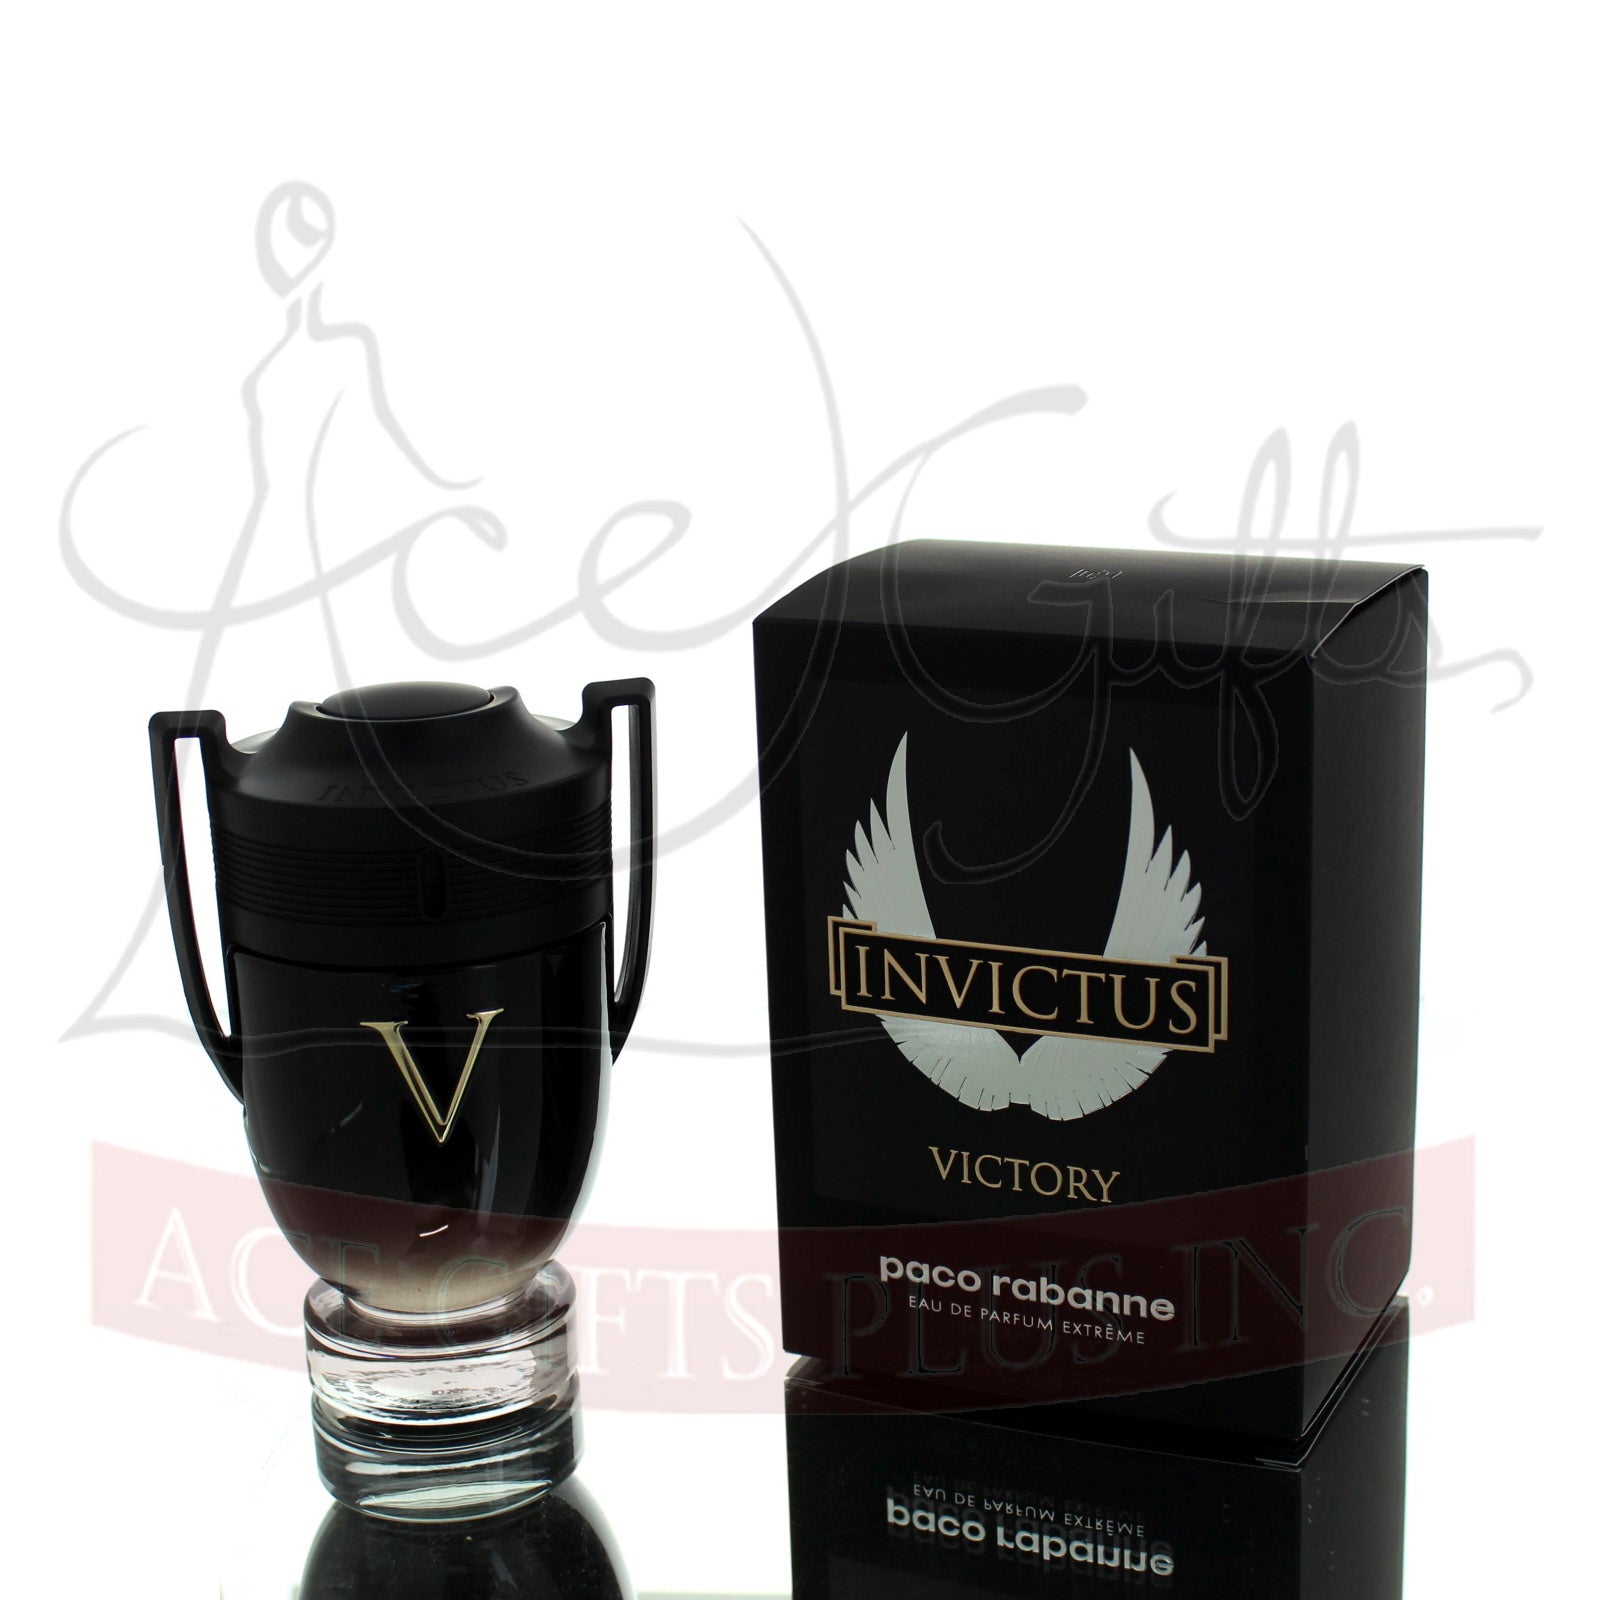 Ace Gifts Plus — Paco Rabanne Invictus Victory (2021) | Ace Gifts Plus ...